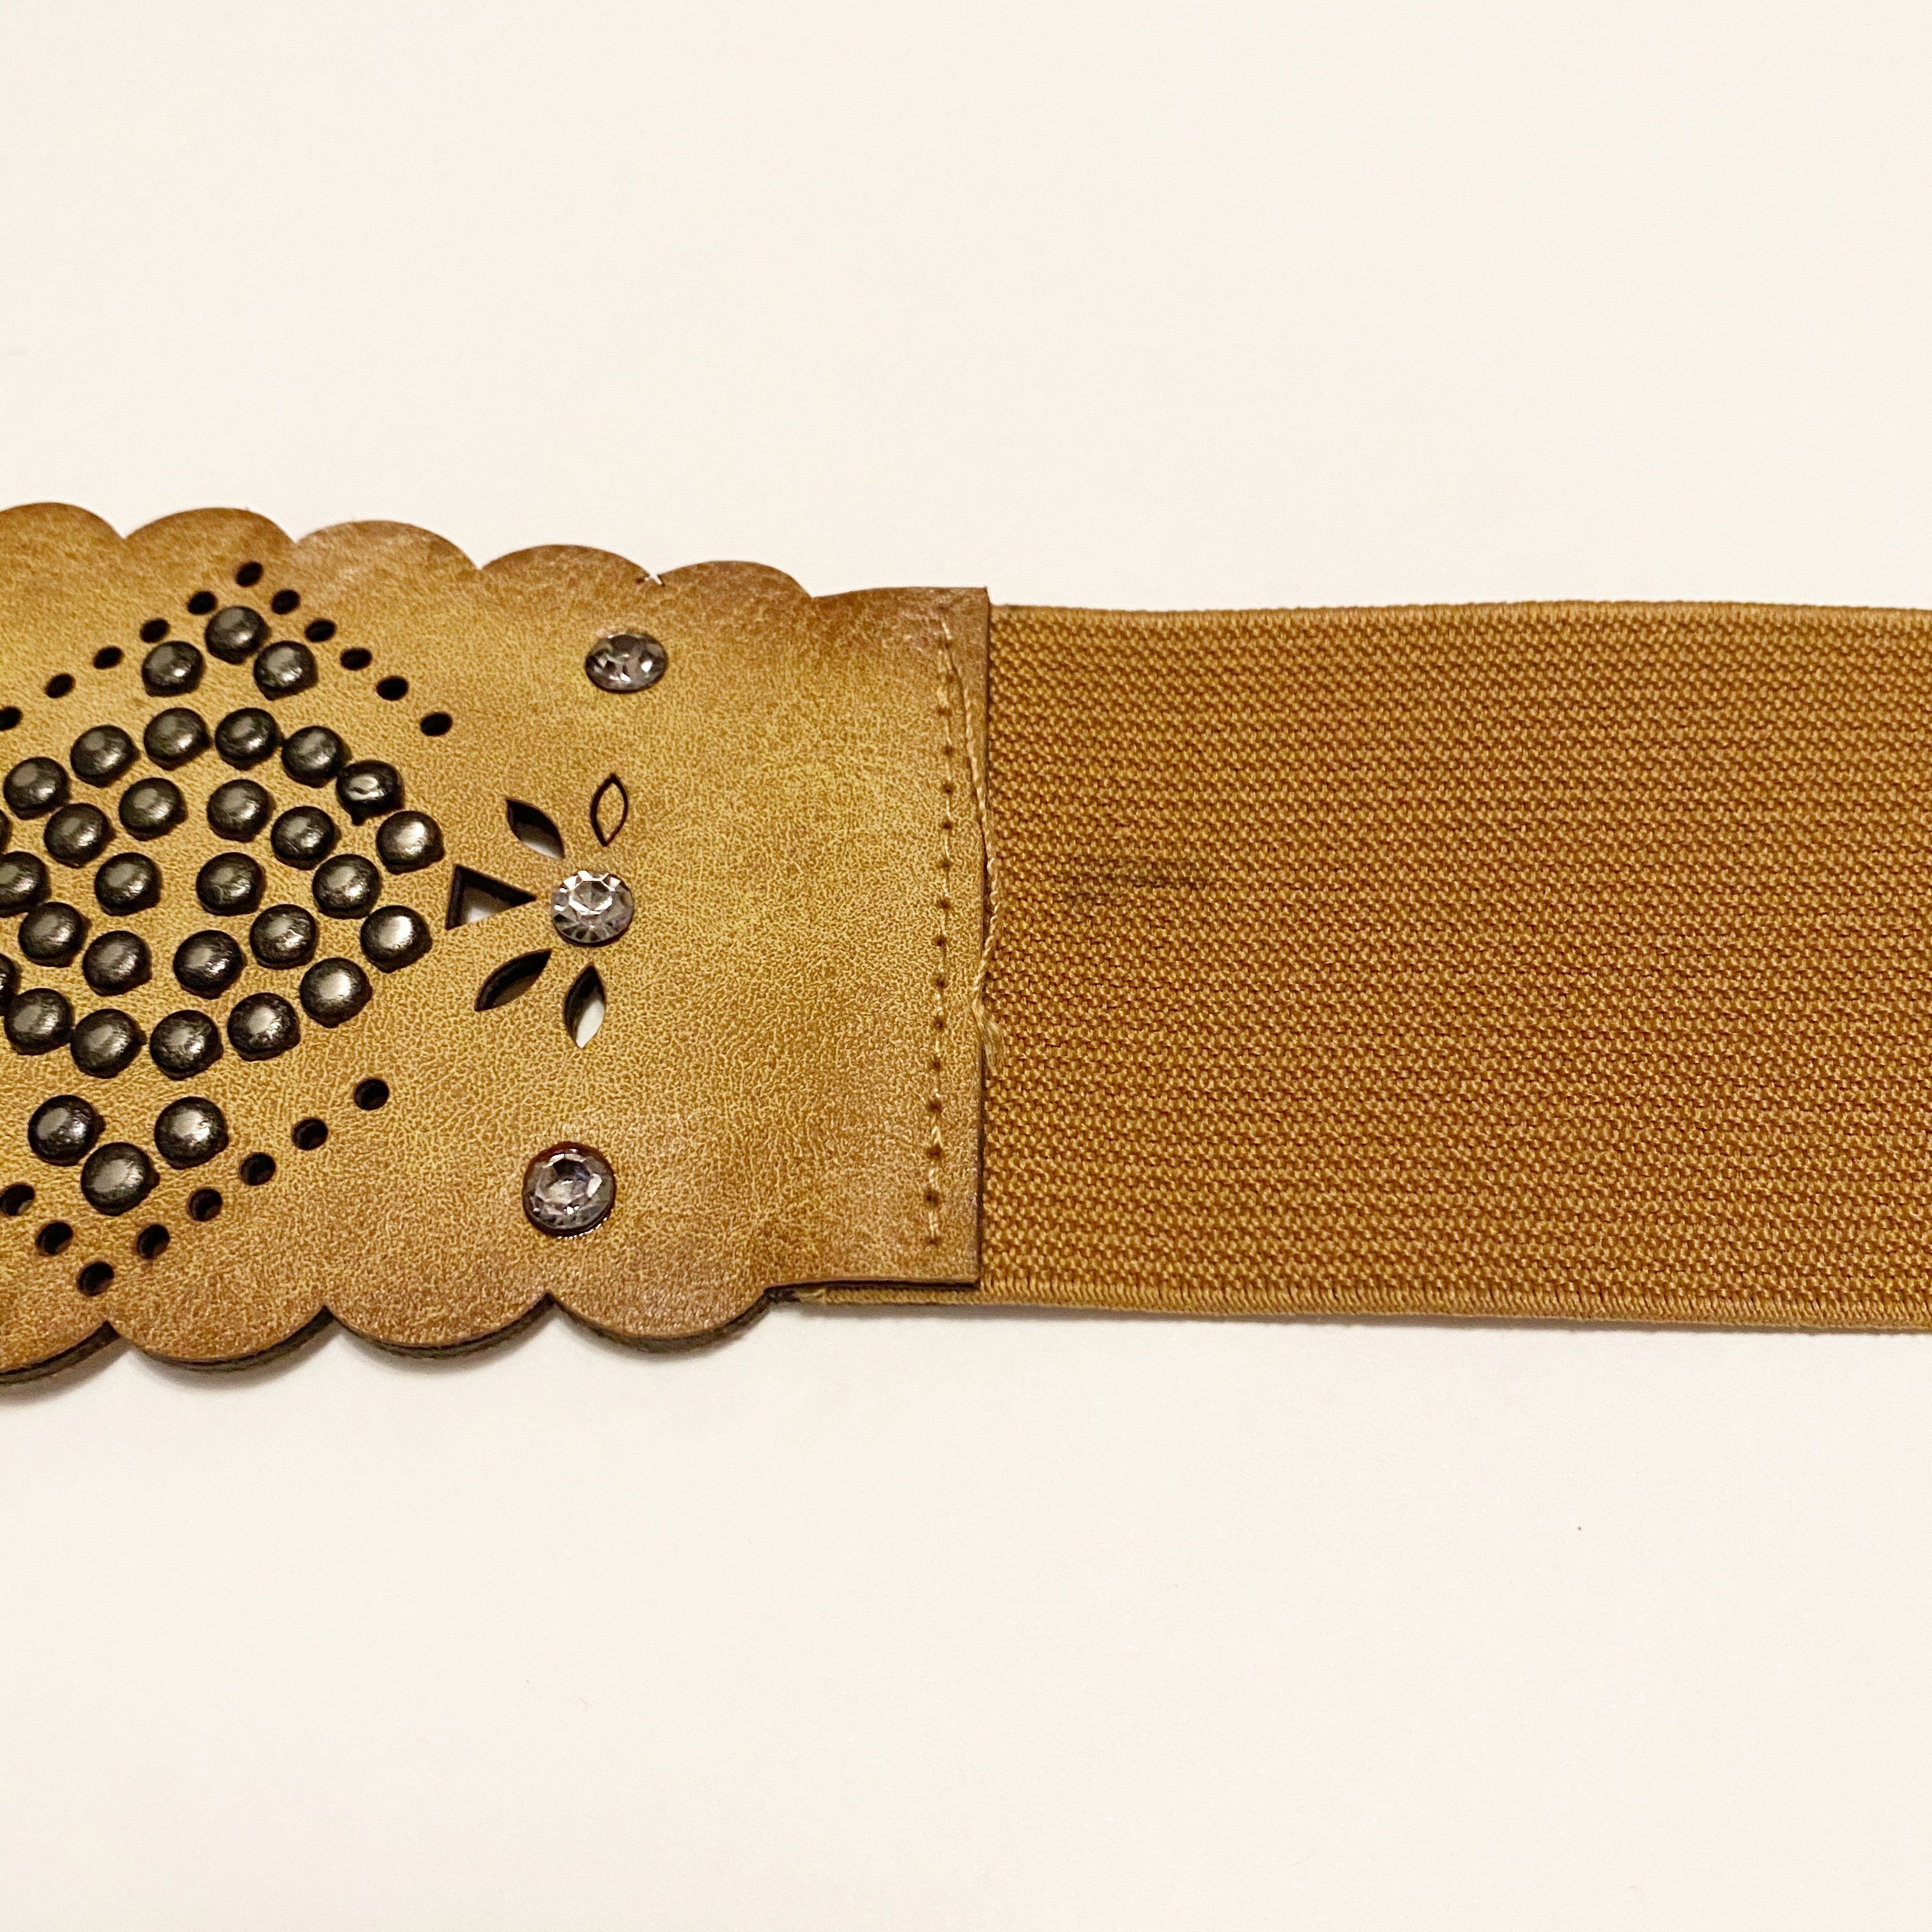 VINTAGE INSPIRED - STUDDED BELT WITH SCALLOPED EDGE